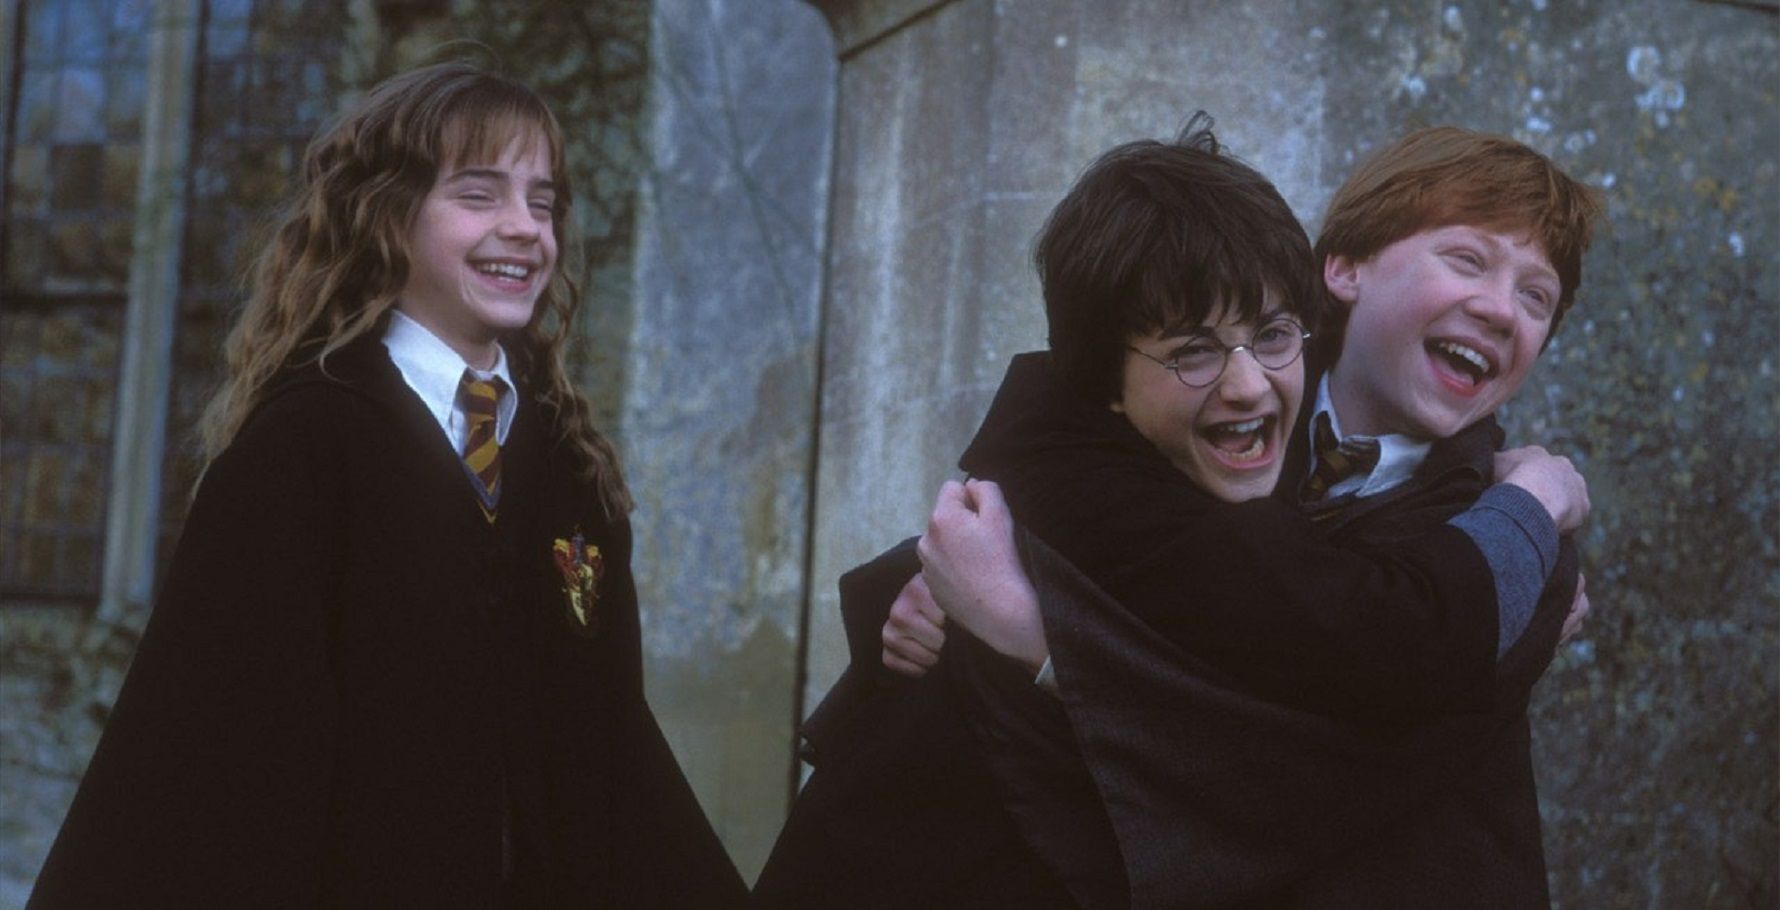 Harry And Hermione's 10 Best Interactions In The Harry Potter Movies